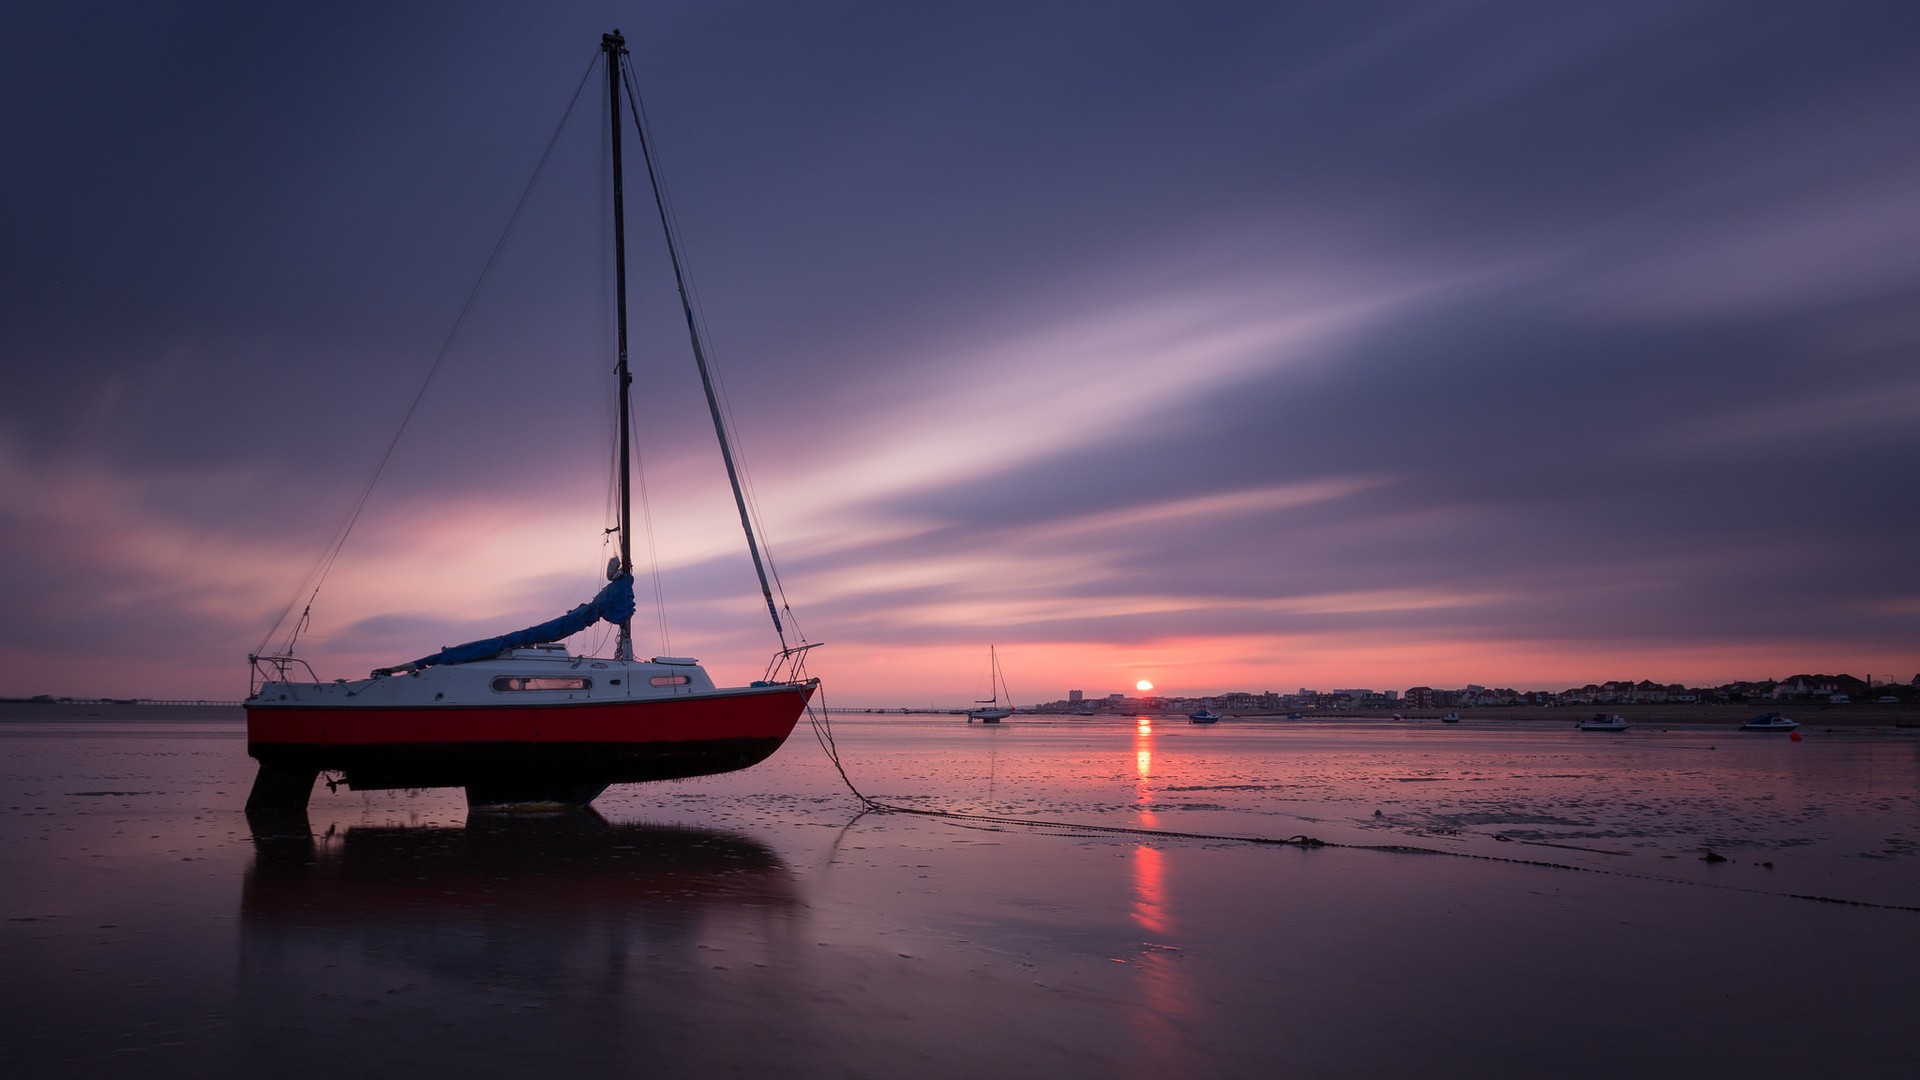 General 1920x1080 sea boat sky clouds outdoors vehicle sunset